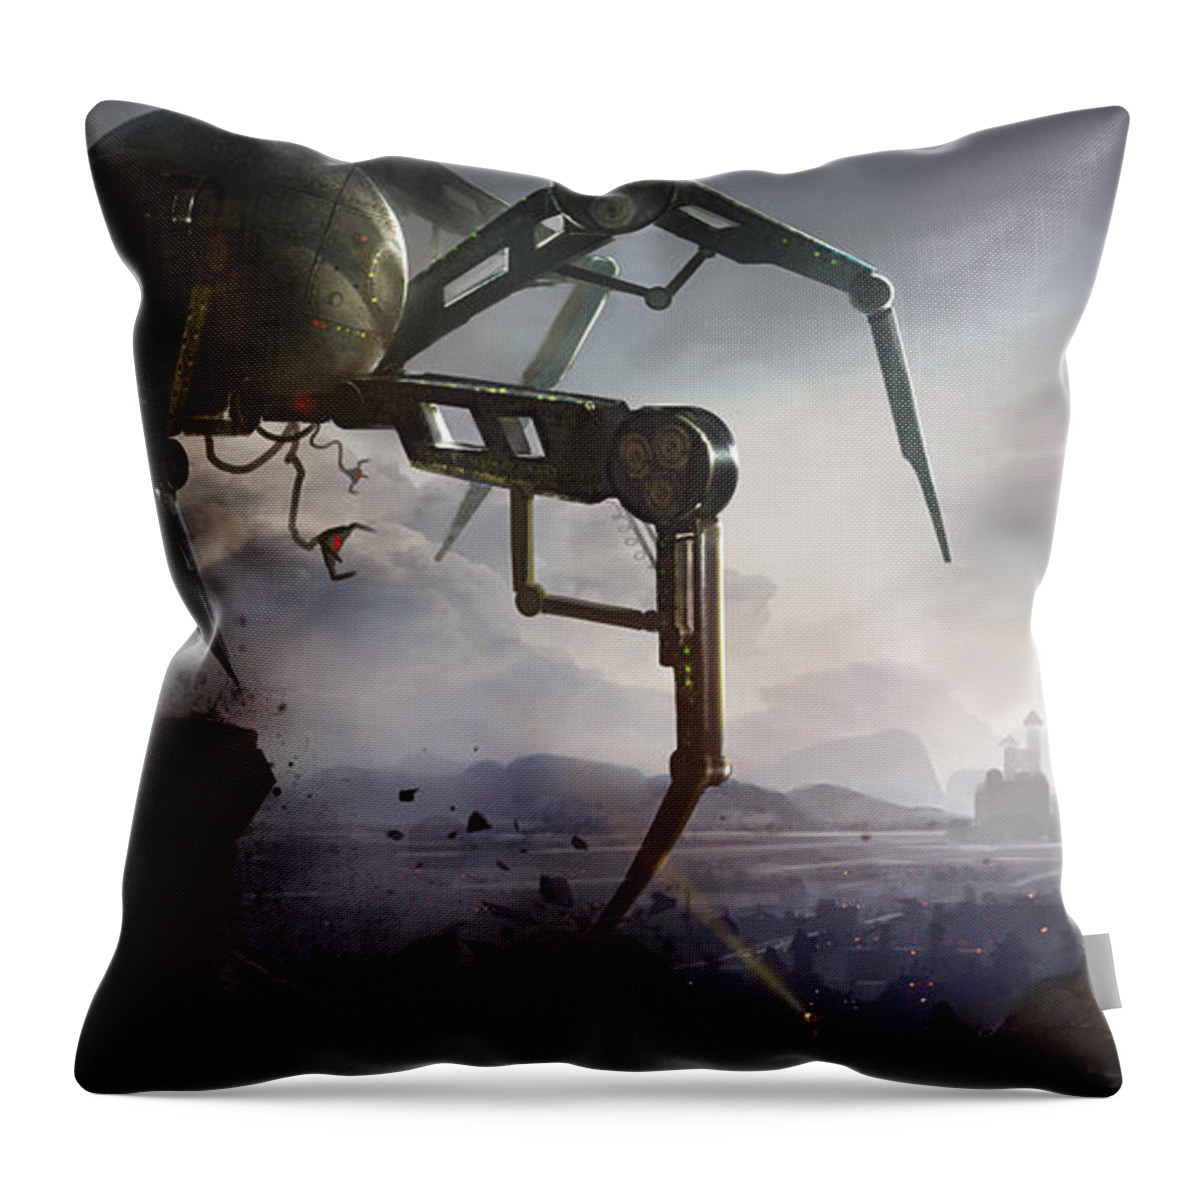 Steam Punk Throw Pillow featuring the digital art The Chase by Kristina Vardazaryan